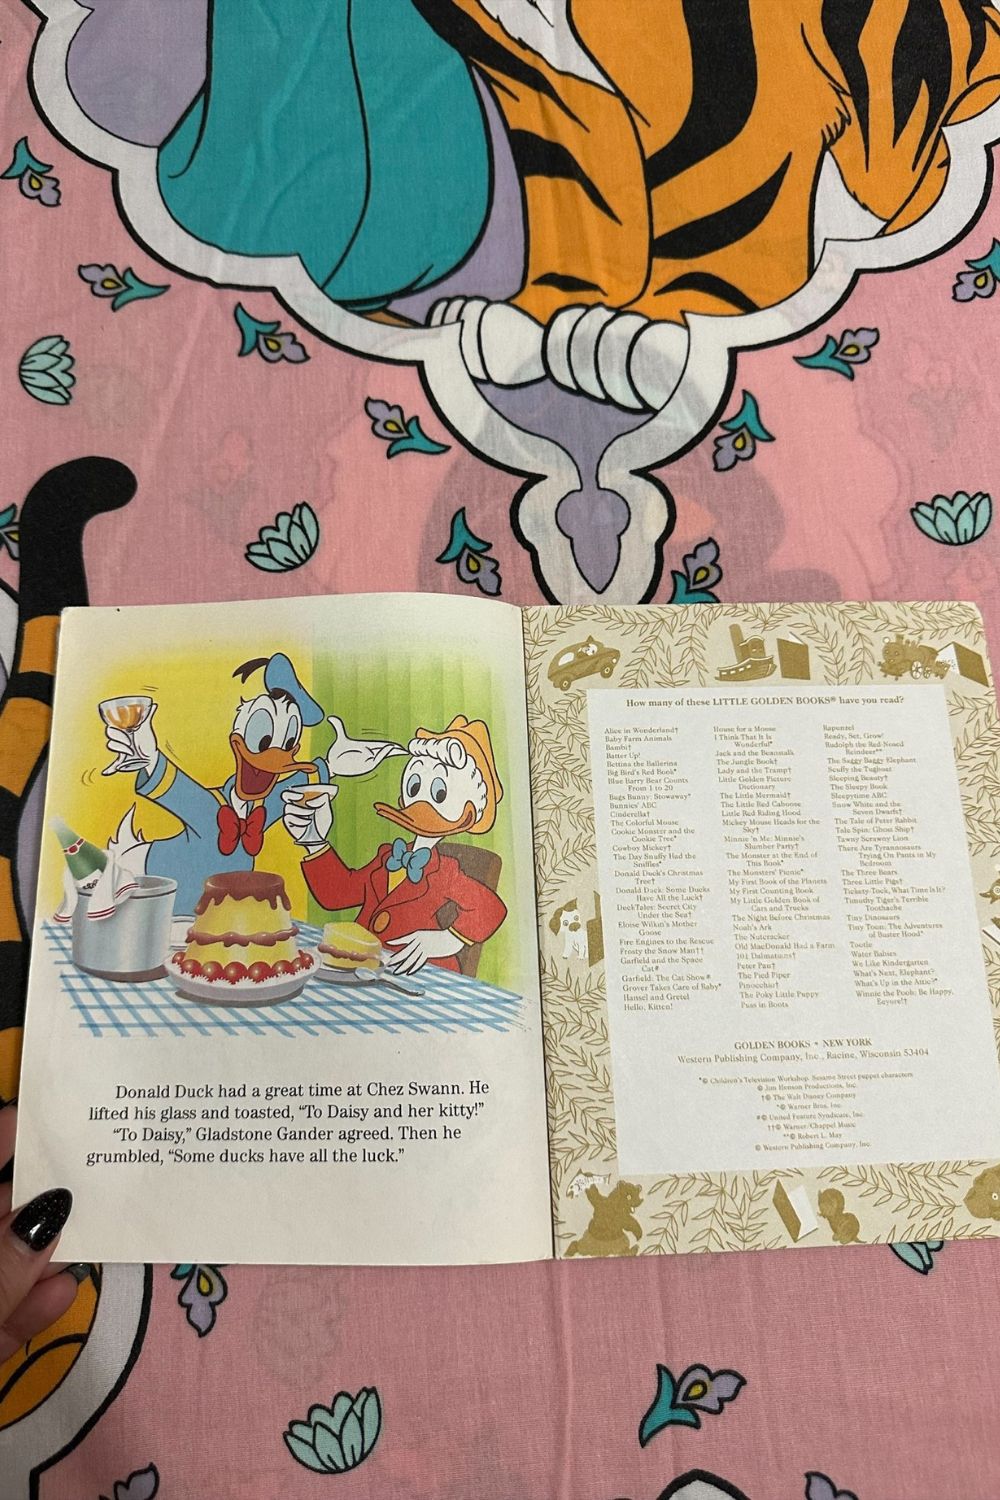 WALT DISNEY'S DONALD DUCK: SOME DUCKS HAVE ALL THE LUCK BOOK*